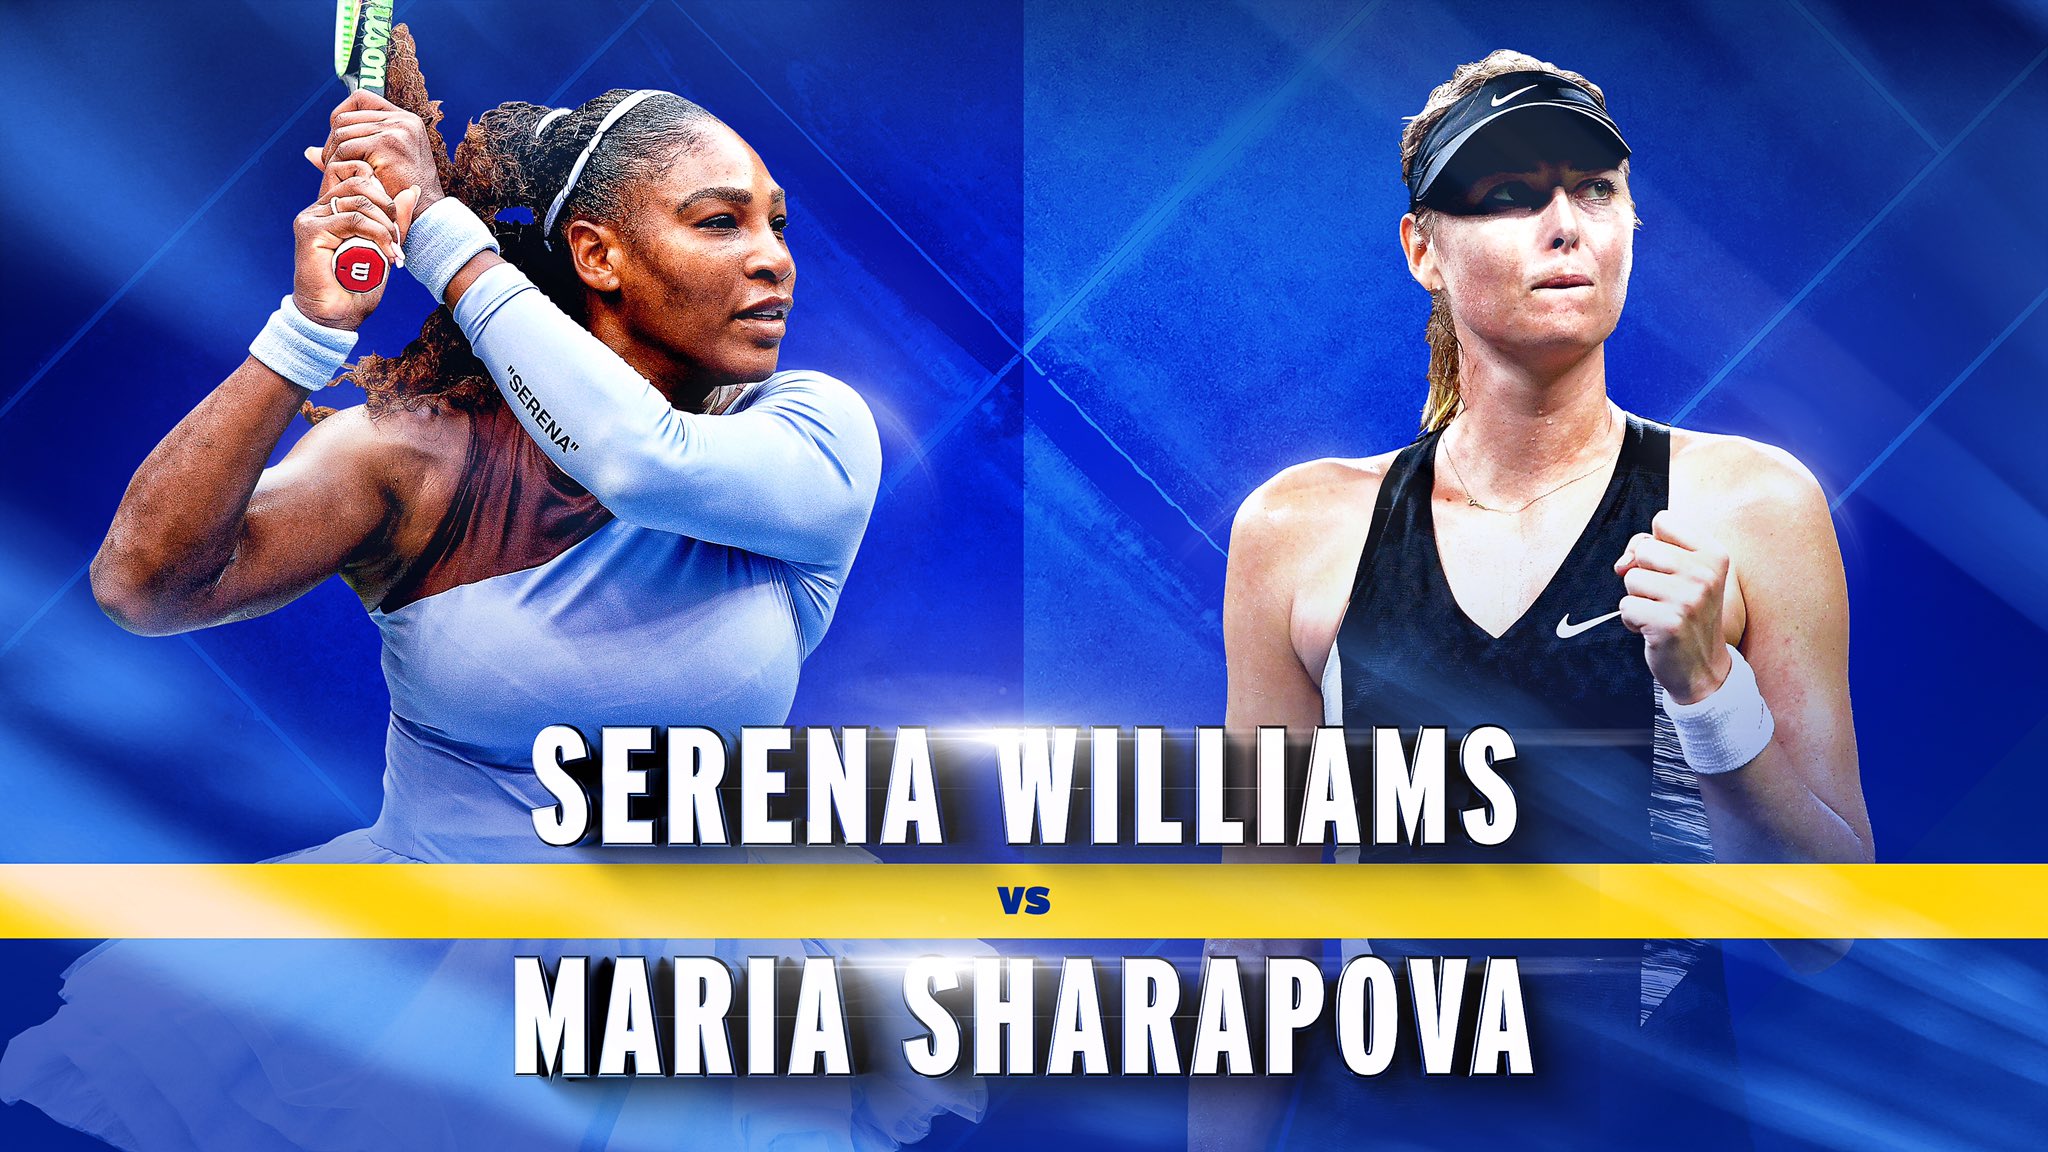 US Open Tennis on Twitter: "One for the ages...🤯😲 Serena Williams will  face Maria Sharapova in R1 for their first ever meeting in Flushing Meadows!  #USOpen https://t.co/T4kSoUdniZ" / Twitter